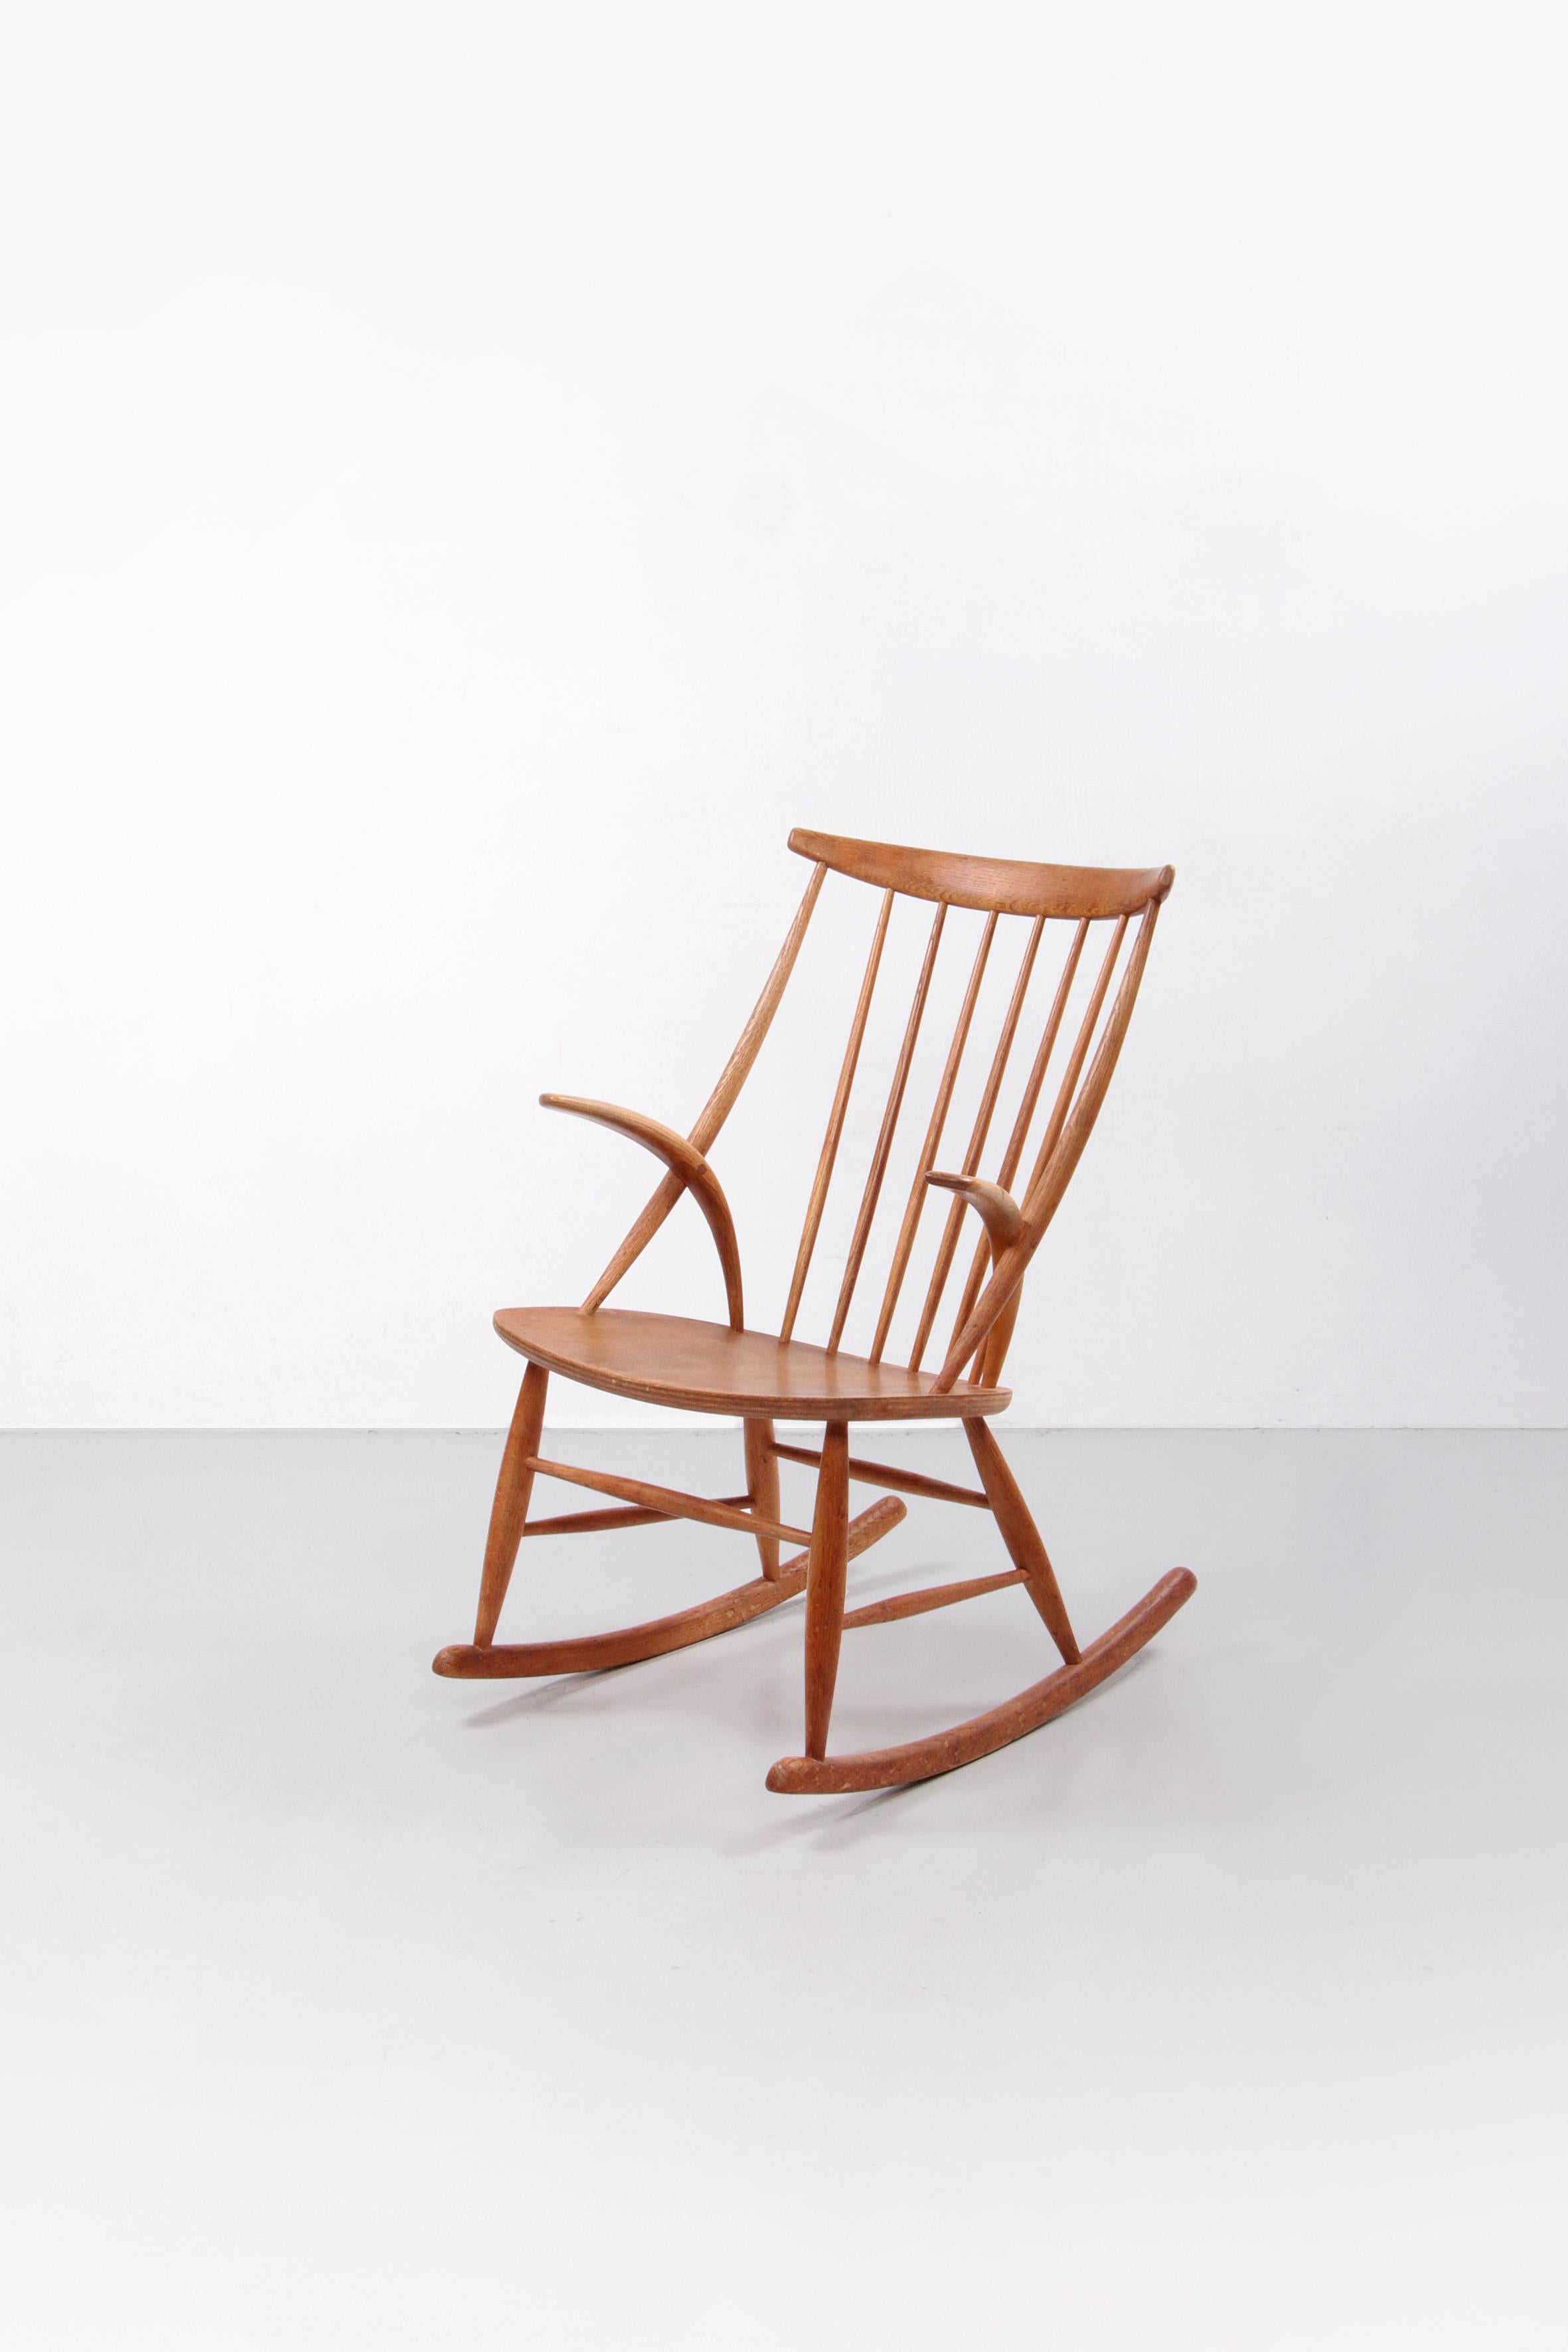 Illum Wikkelso and Niels Eilersen rocking chair 1958

This original, iconic, beautifully constructed No. 3 rocking chair was designed by Danish furniture architect Kristian Illum Wikkelsø in 1958 for Niels Eilersen Mobler of Denmark. It's a real